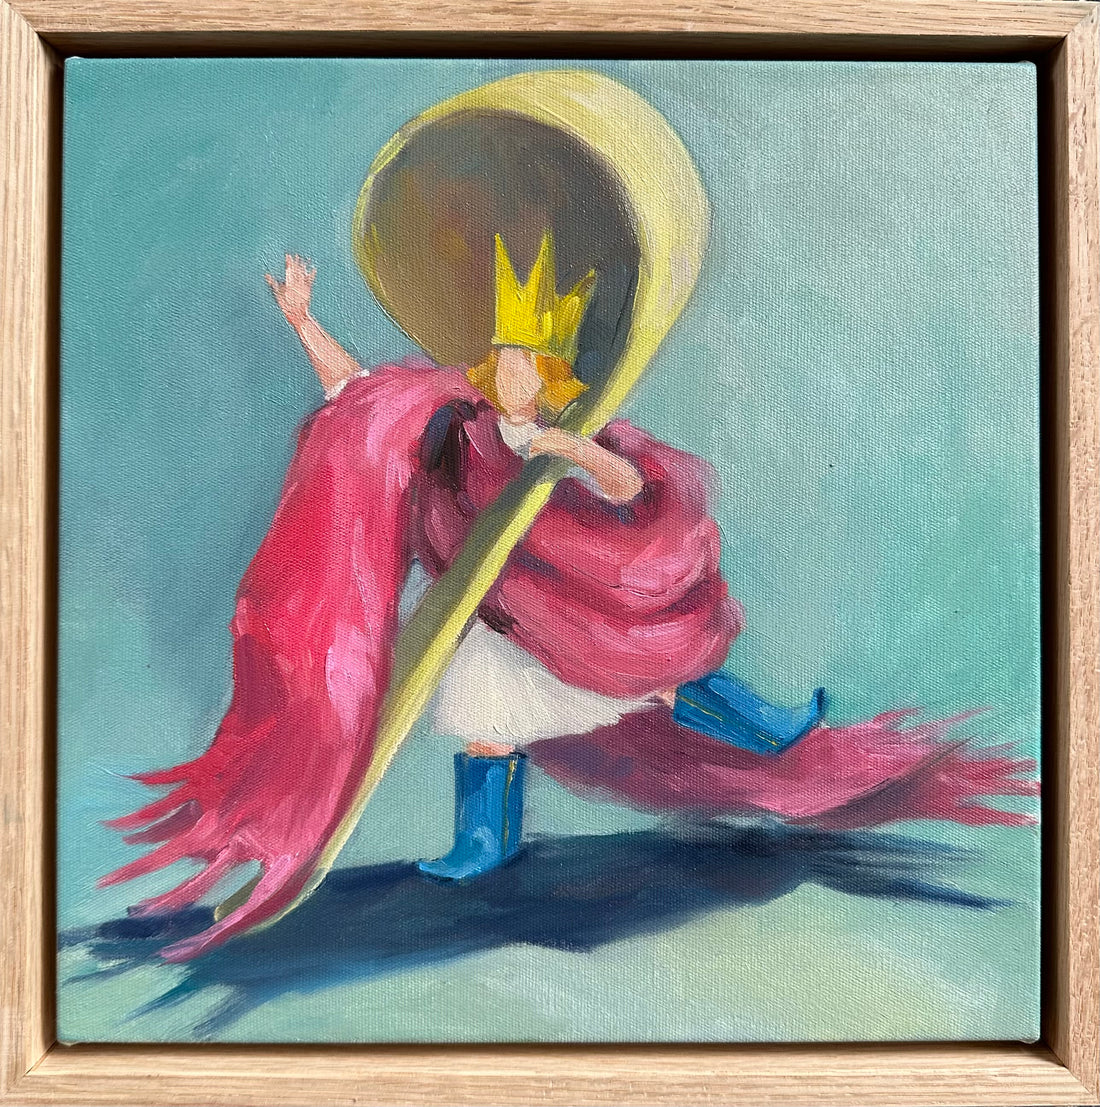 Little Prince Balancing Act By Zory McGrath - SOLD